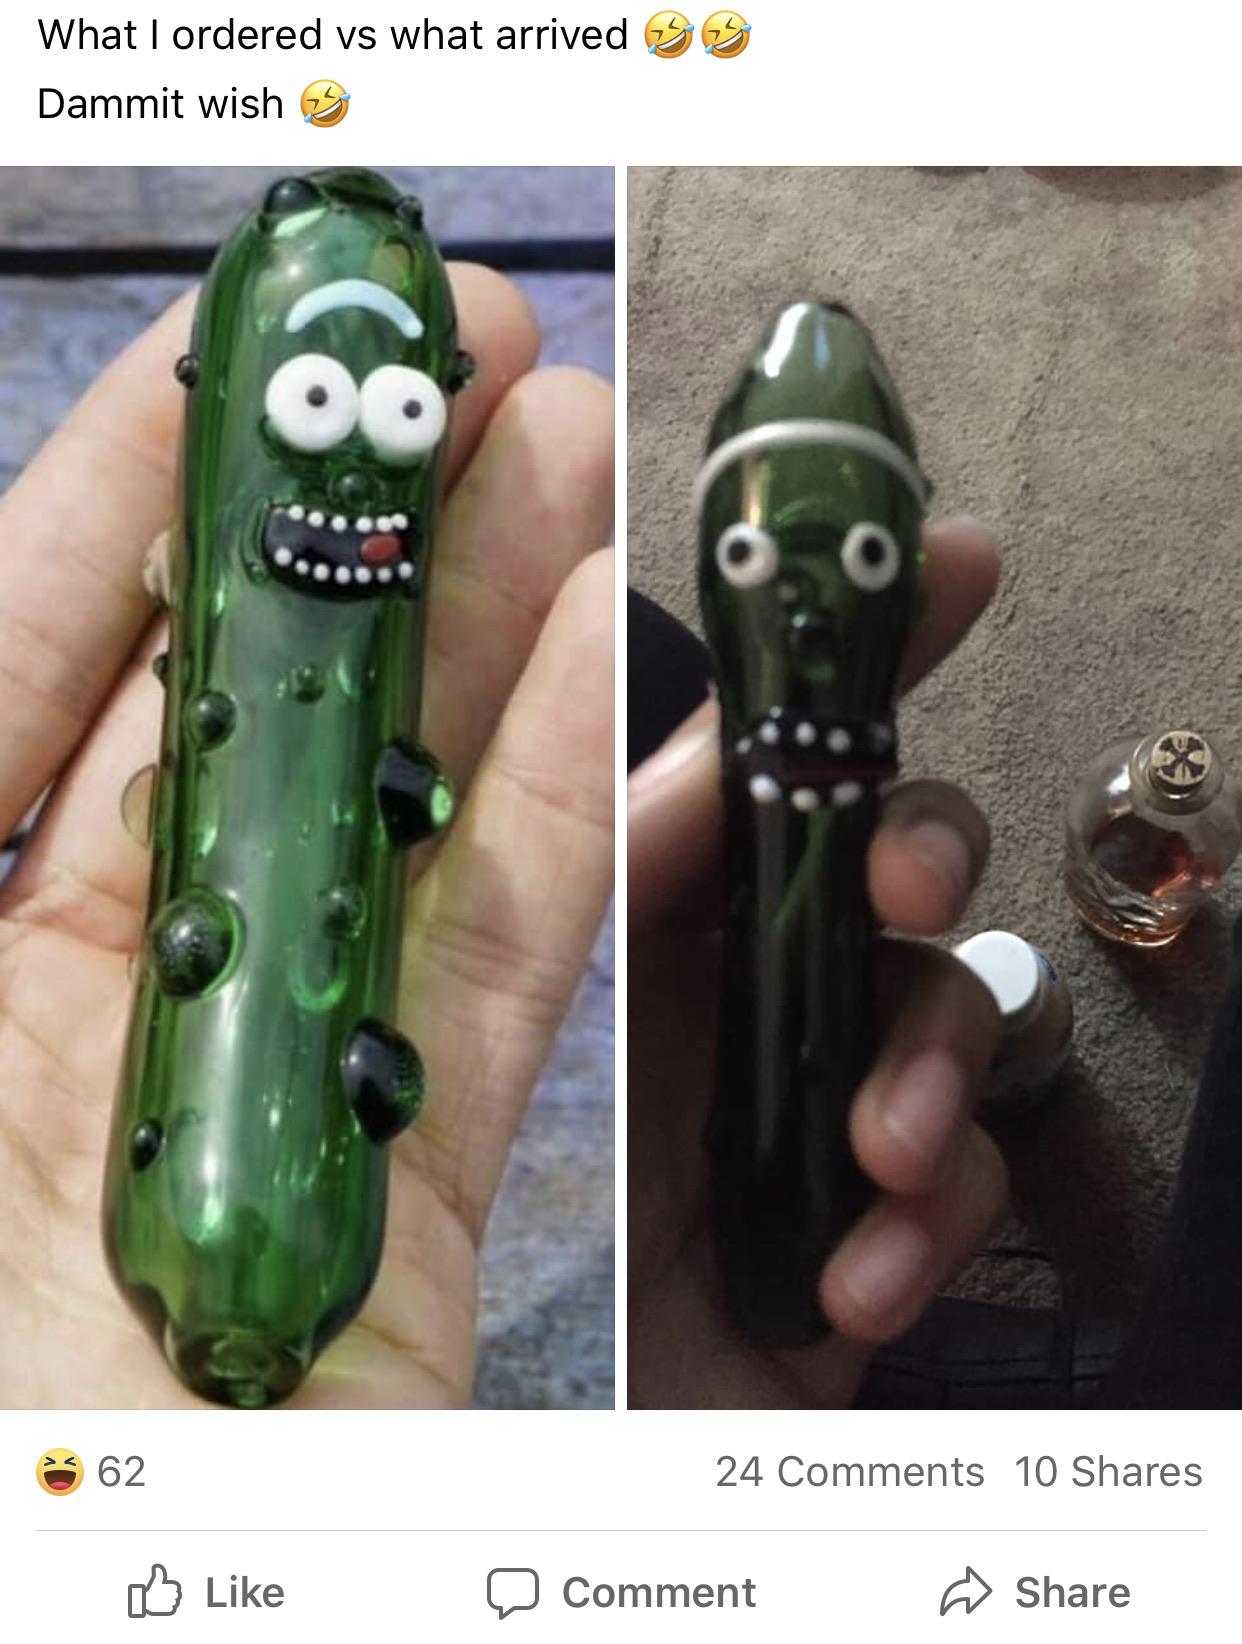 pickle rick pipe - What I ordered vs what arrived 33 Dammit wish 3 362 24 10 Comment e